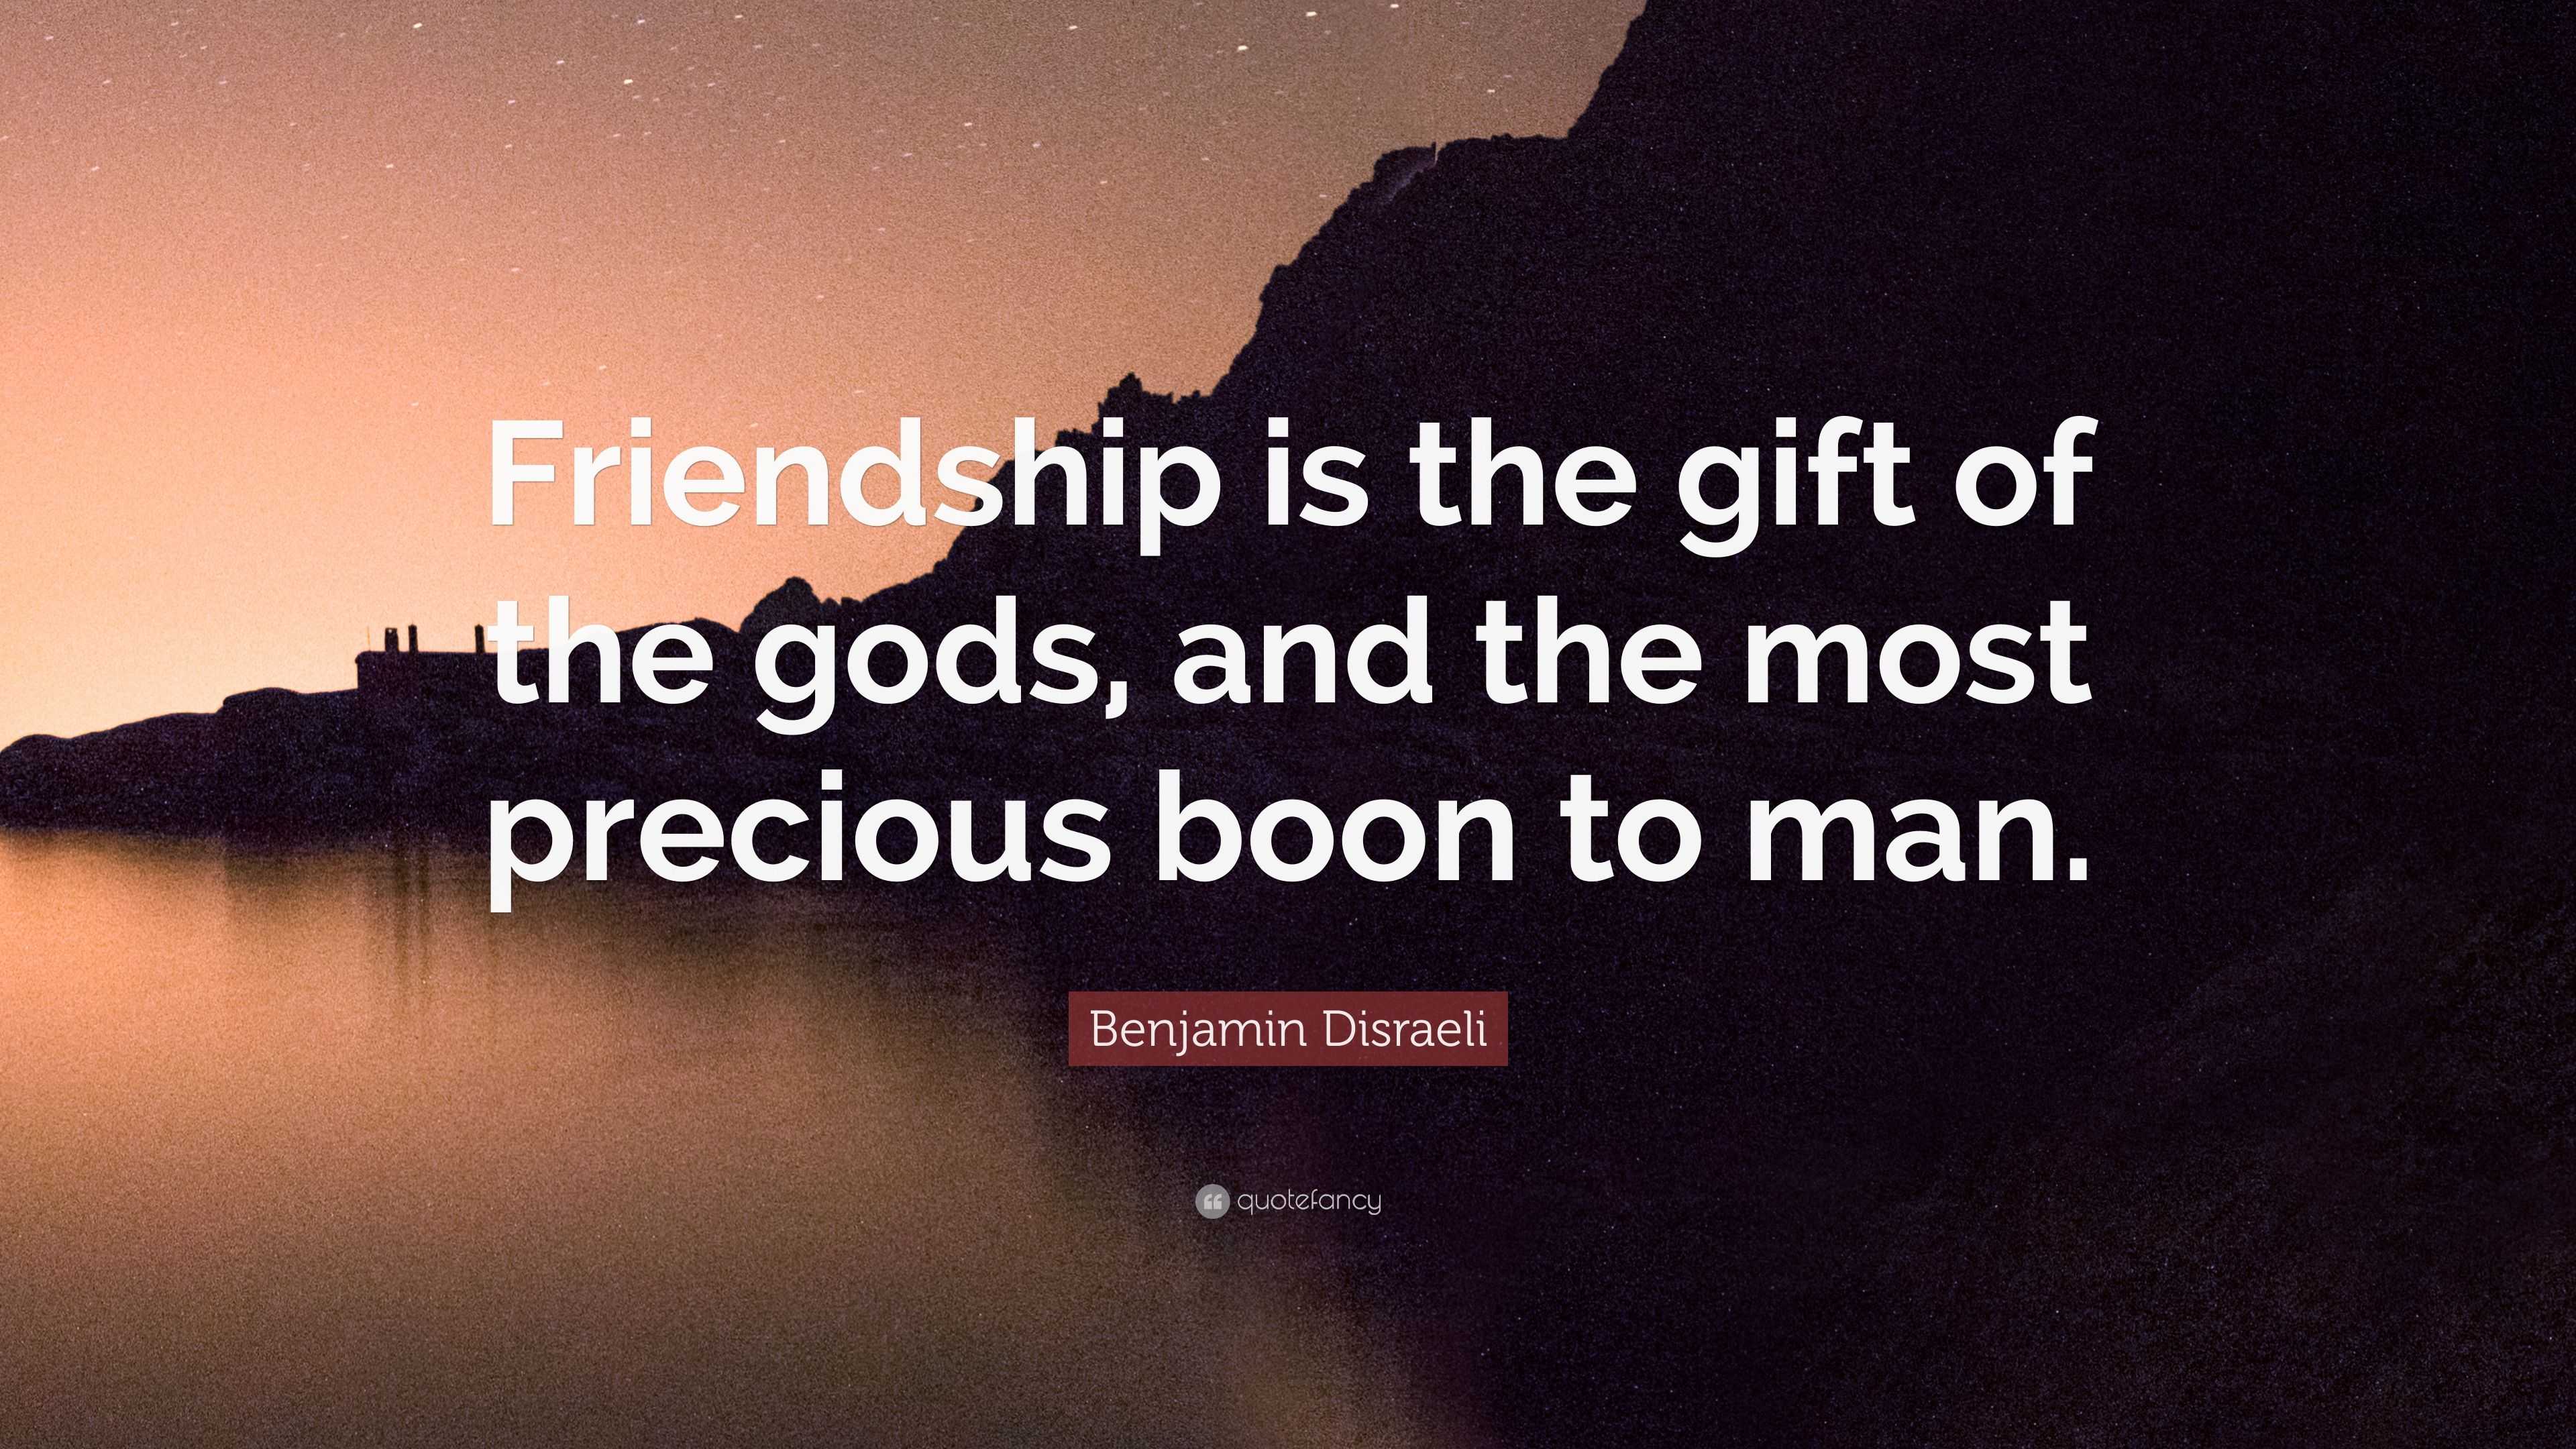 William Osler Quote: “The most essential thing for happiness is the gift of  friendship.”